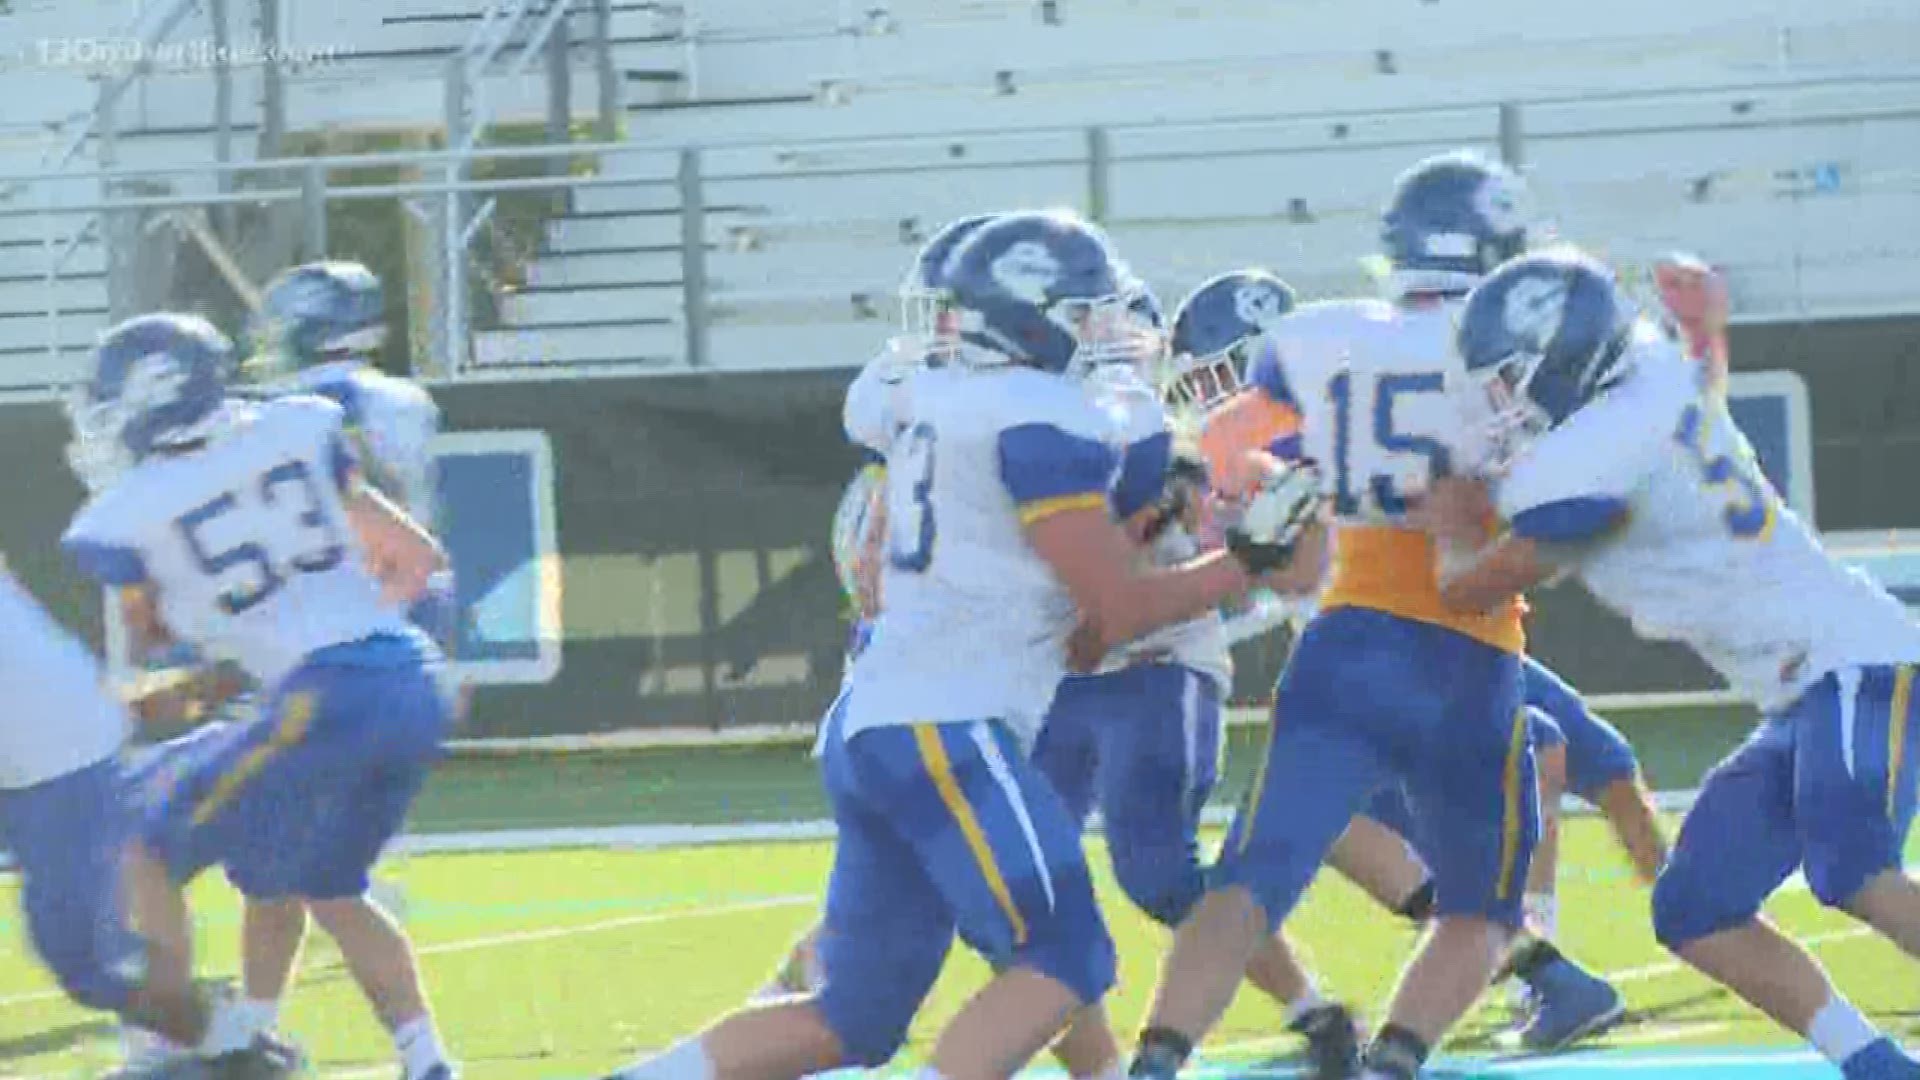 Grand Rapids Catholic Central will host Sparta Friday, Sept. 20.